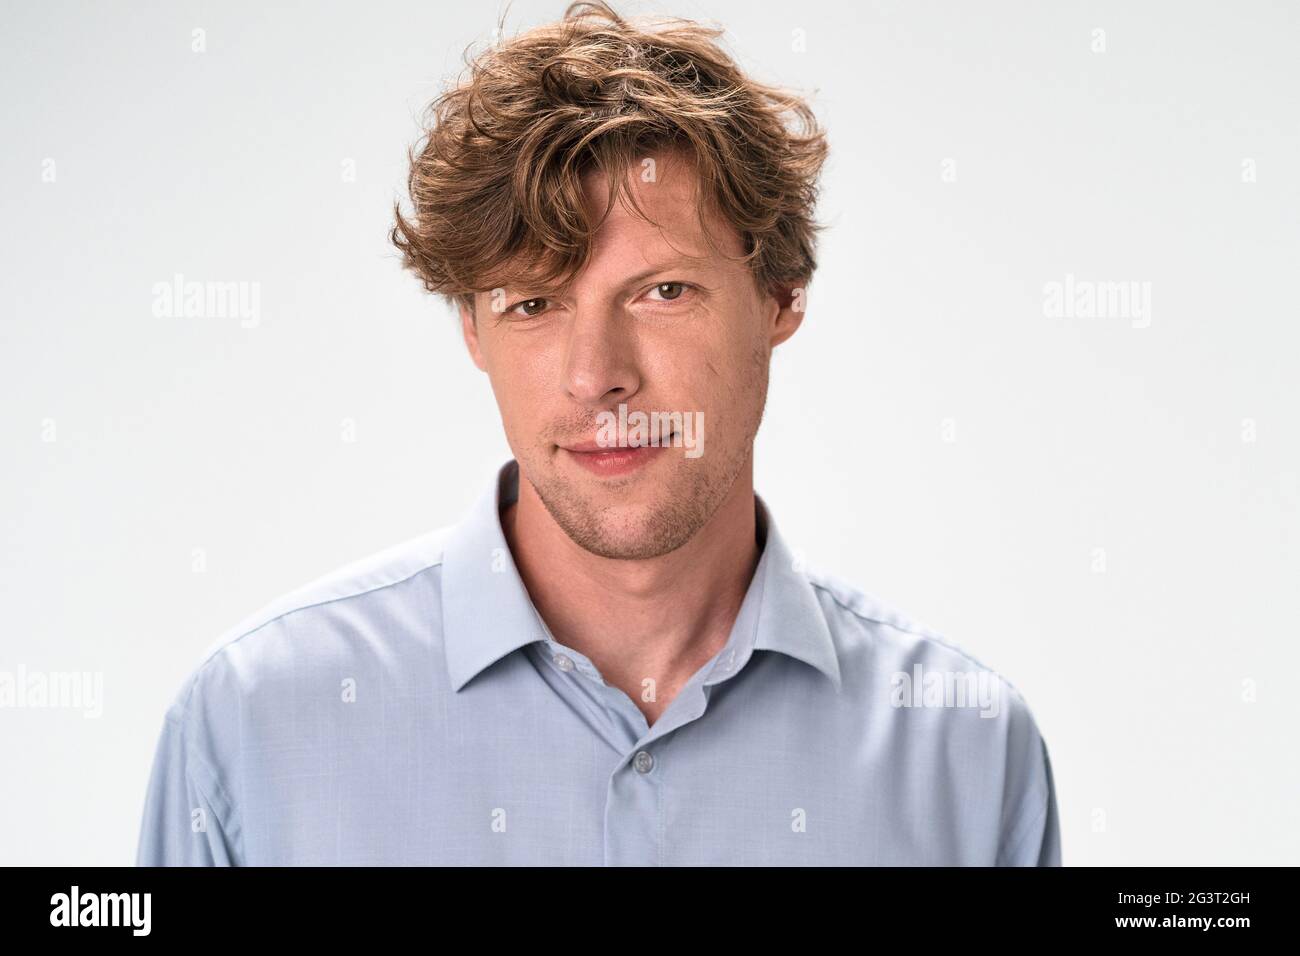 Slightly smiling man isolated on white background. Hazel eyes Caucasian  macho with curly red hair wearing light blue shirt looks Stock Photo - Alamy